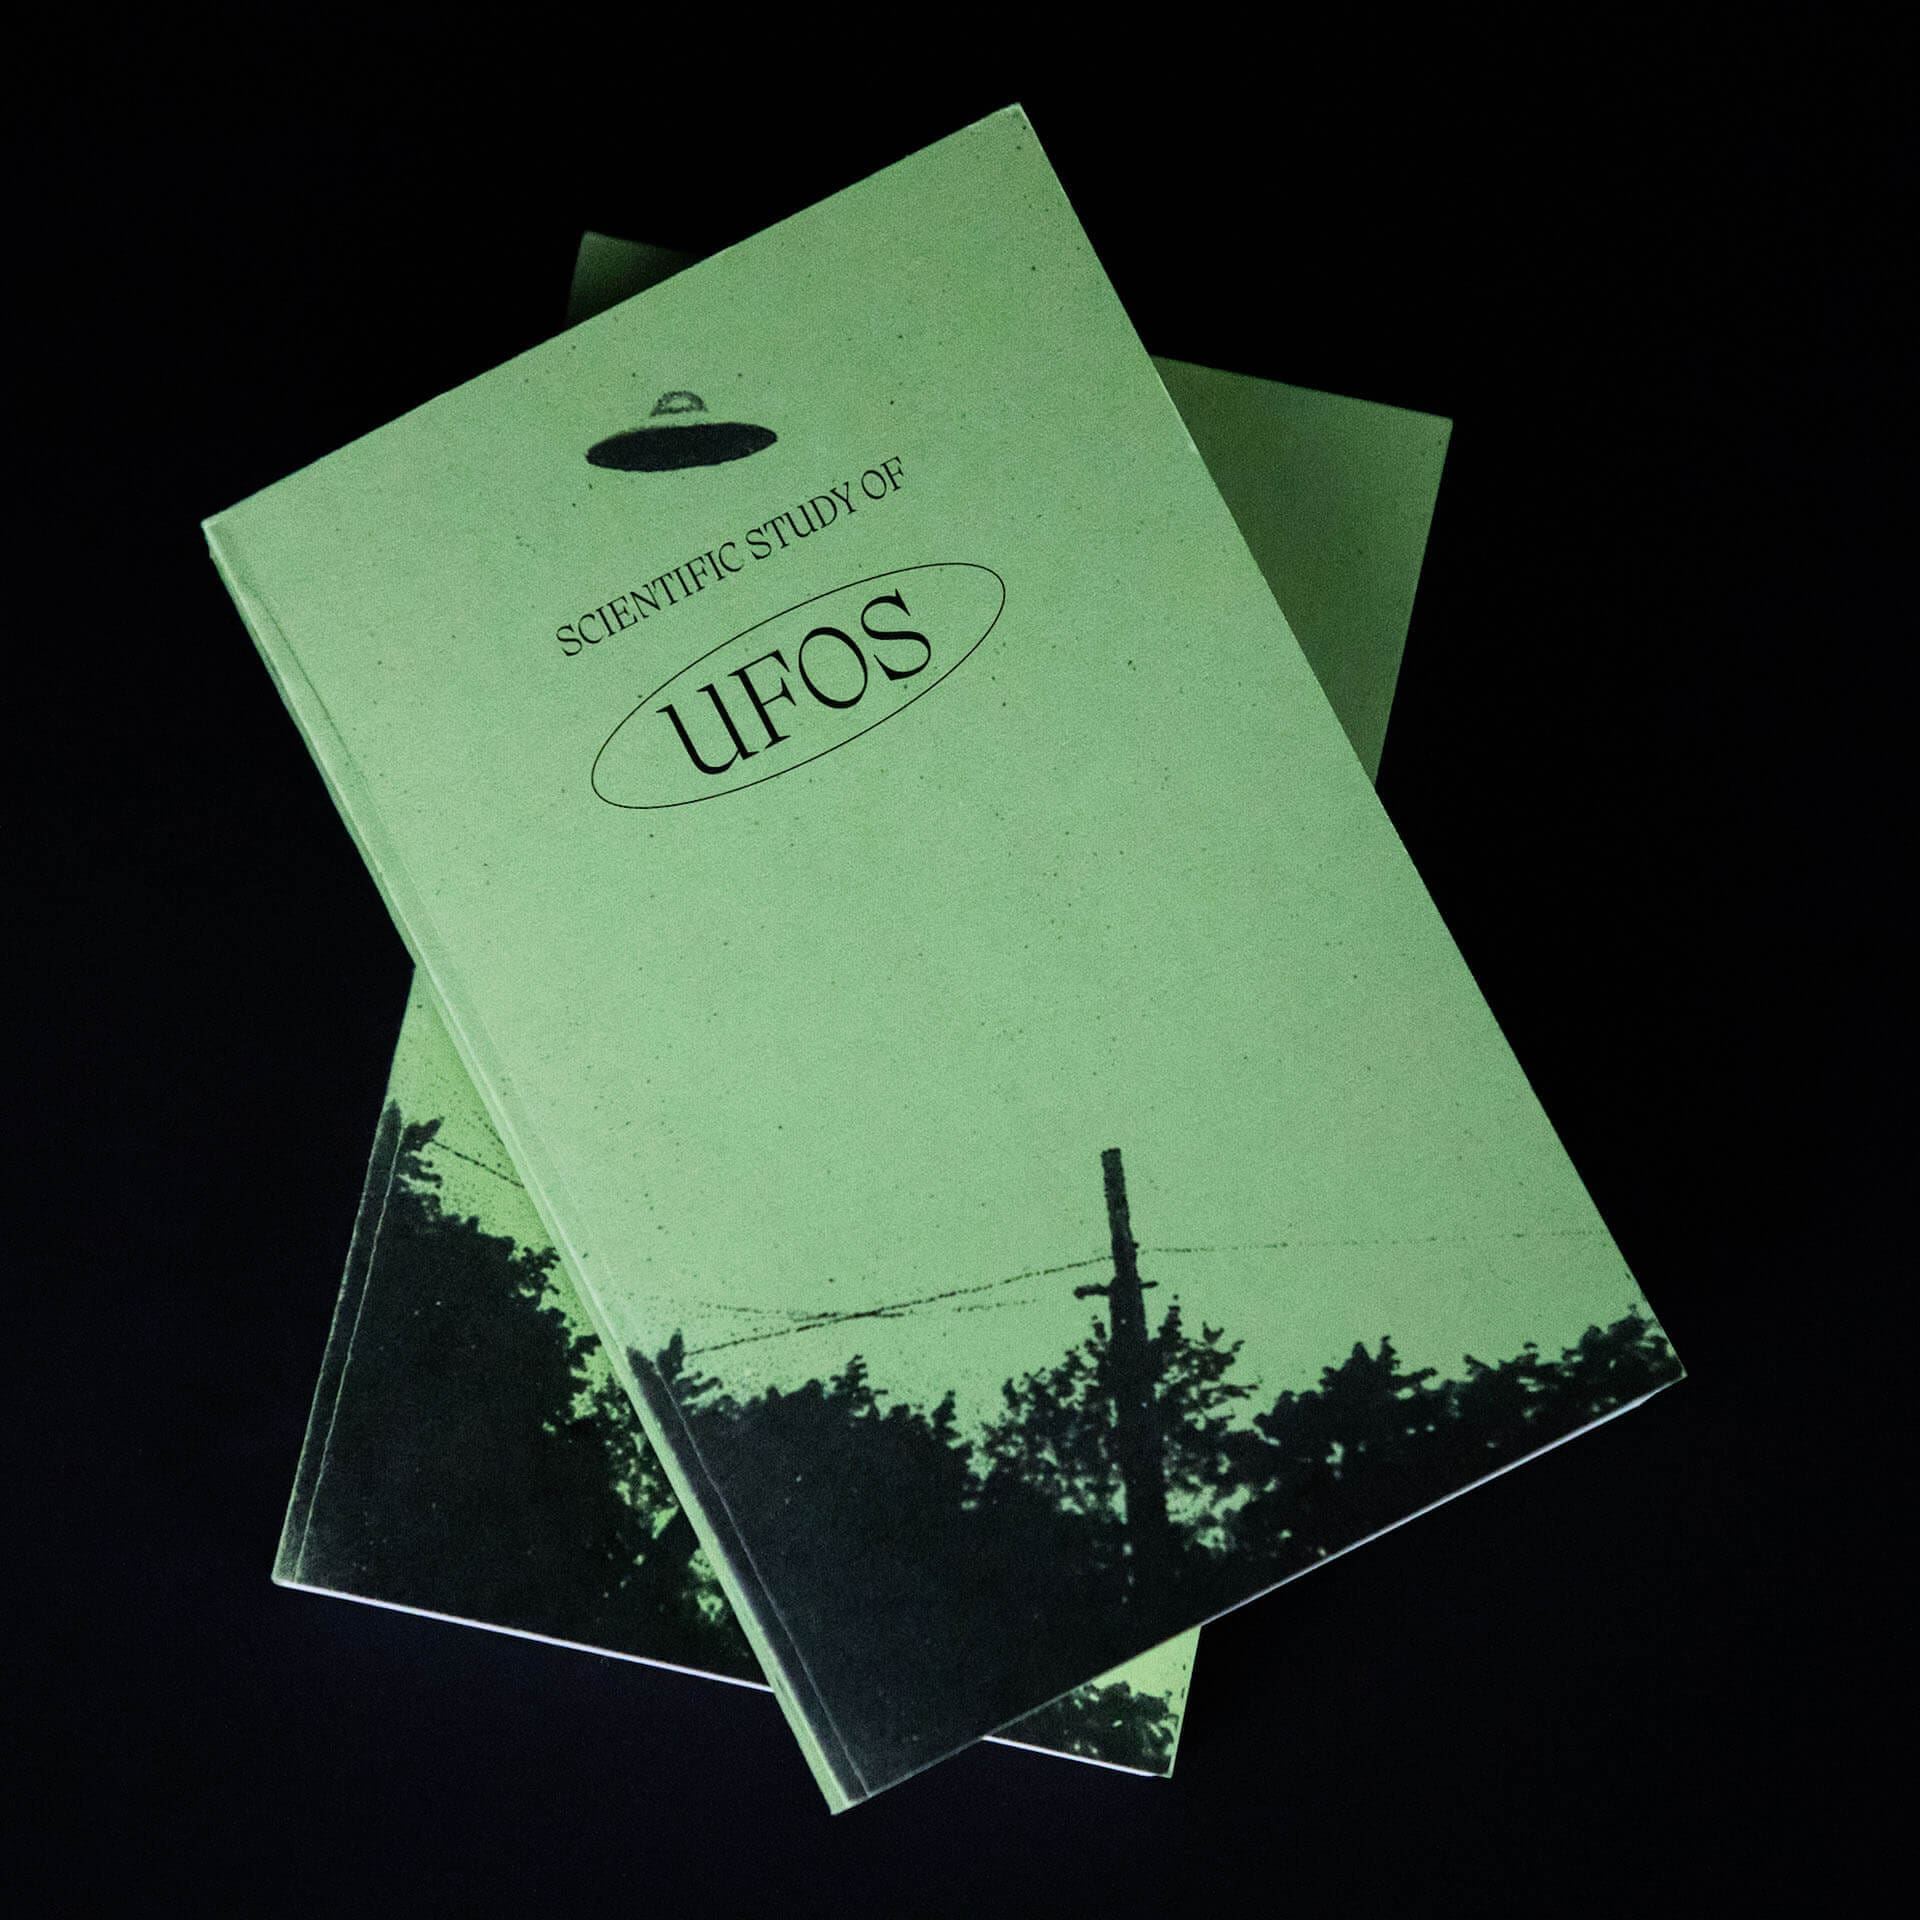 Photo of two green books stacked on top of each other on a black background. The top of the book has a black title that says "Scientific Study of UFOs" below a black UFO symbol. At the bottom of the book is a black image of tree tops.